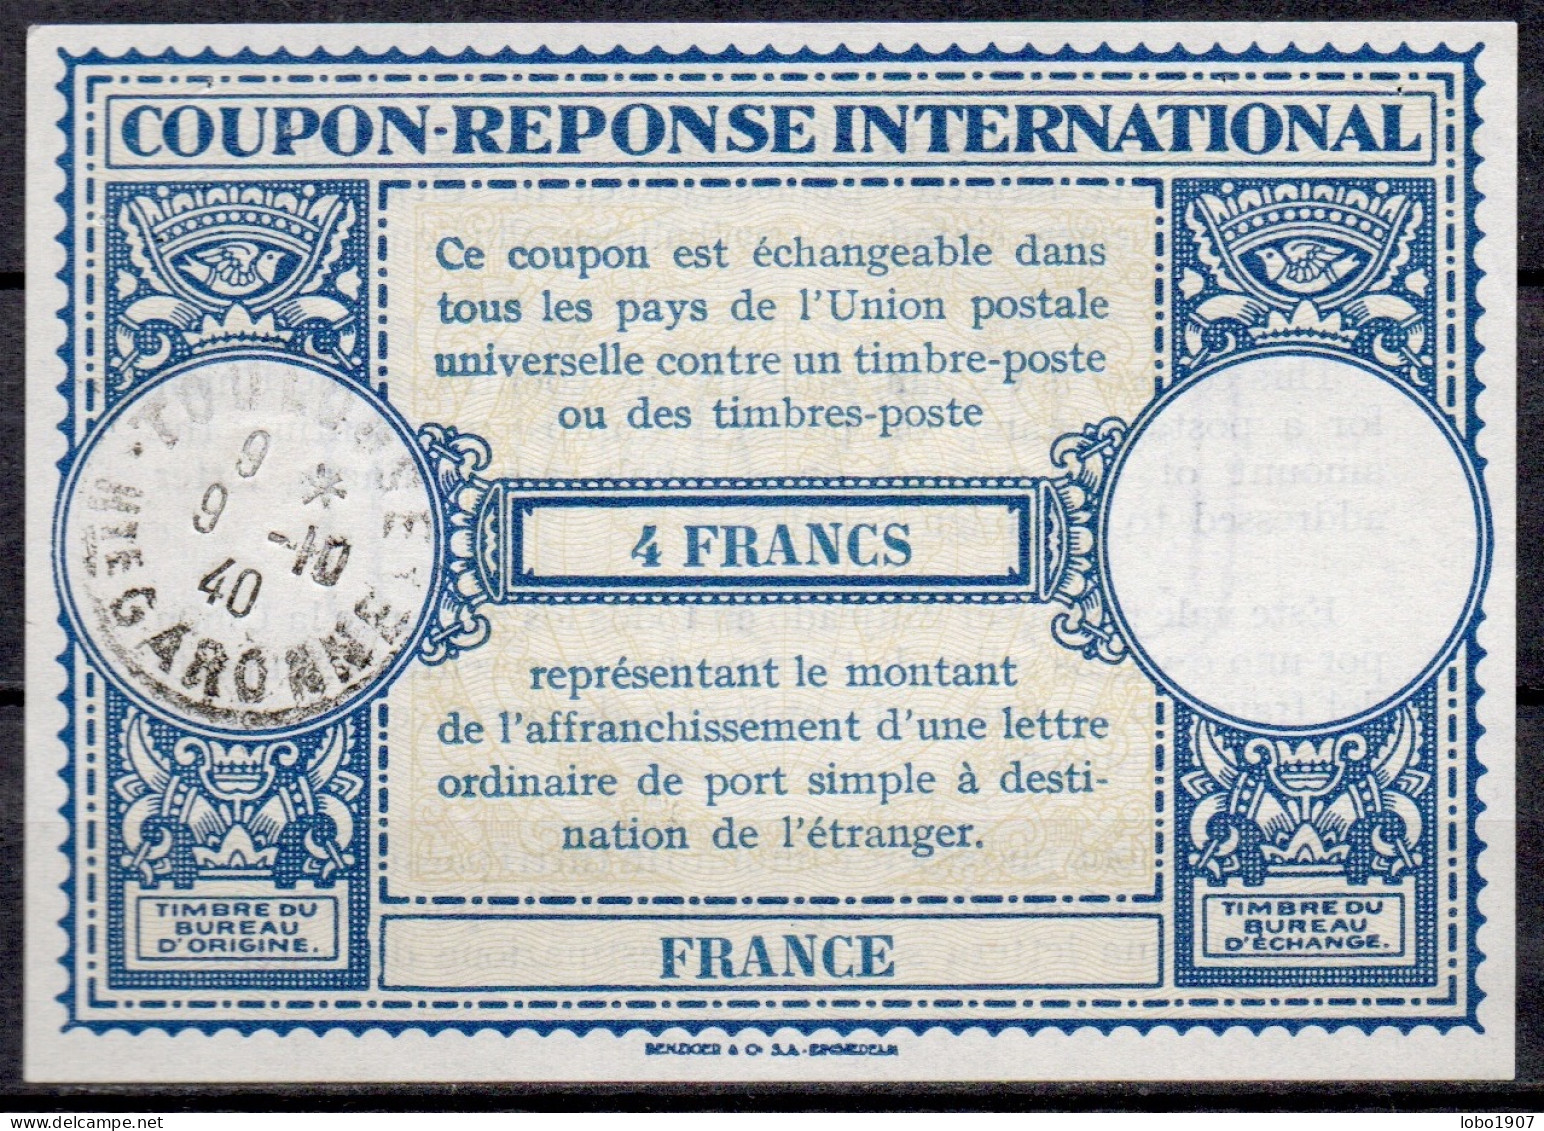 FRANCE  Rare Type Lo13ap  4 FRANCS  International Reply Coupon Reponse Antwortschein IRC IAS Cupon Respuesta O TOULOUSE - Buoni Risposte